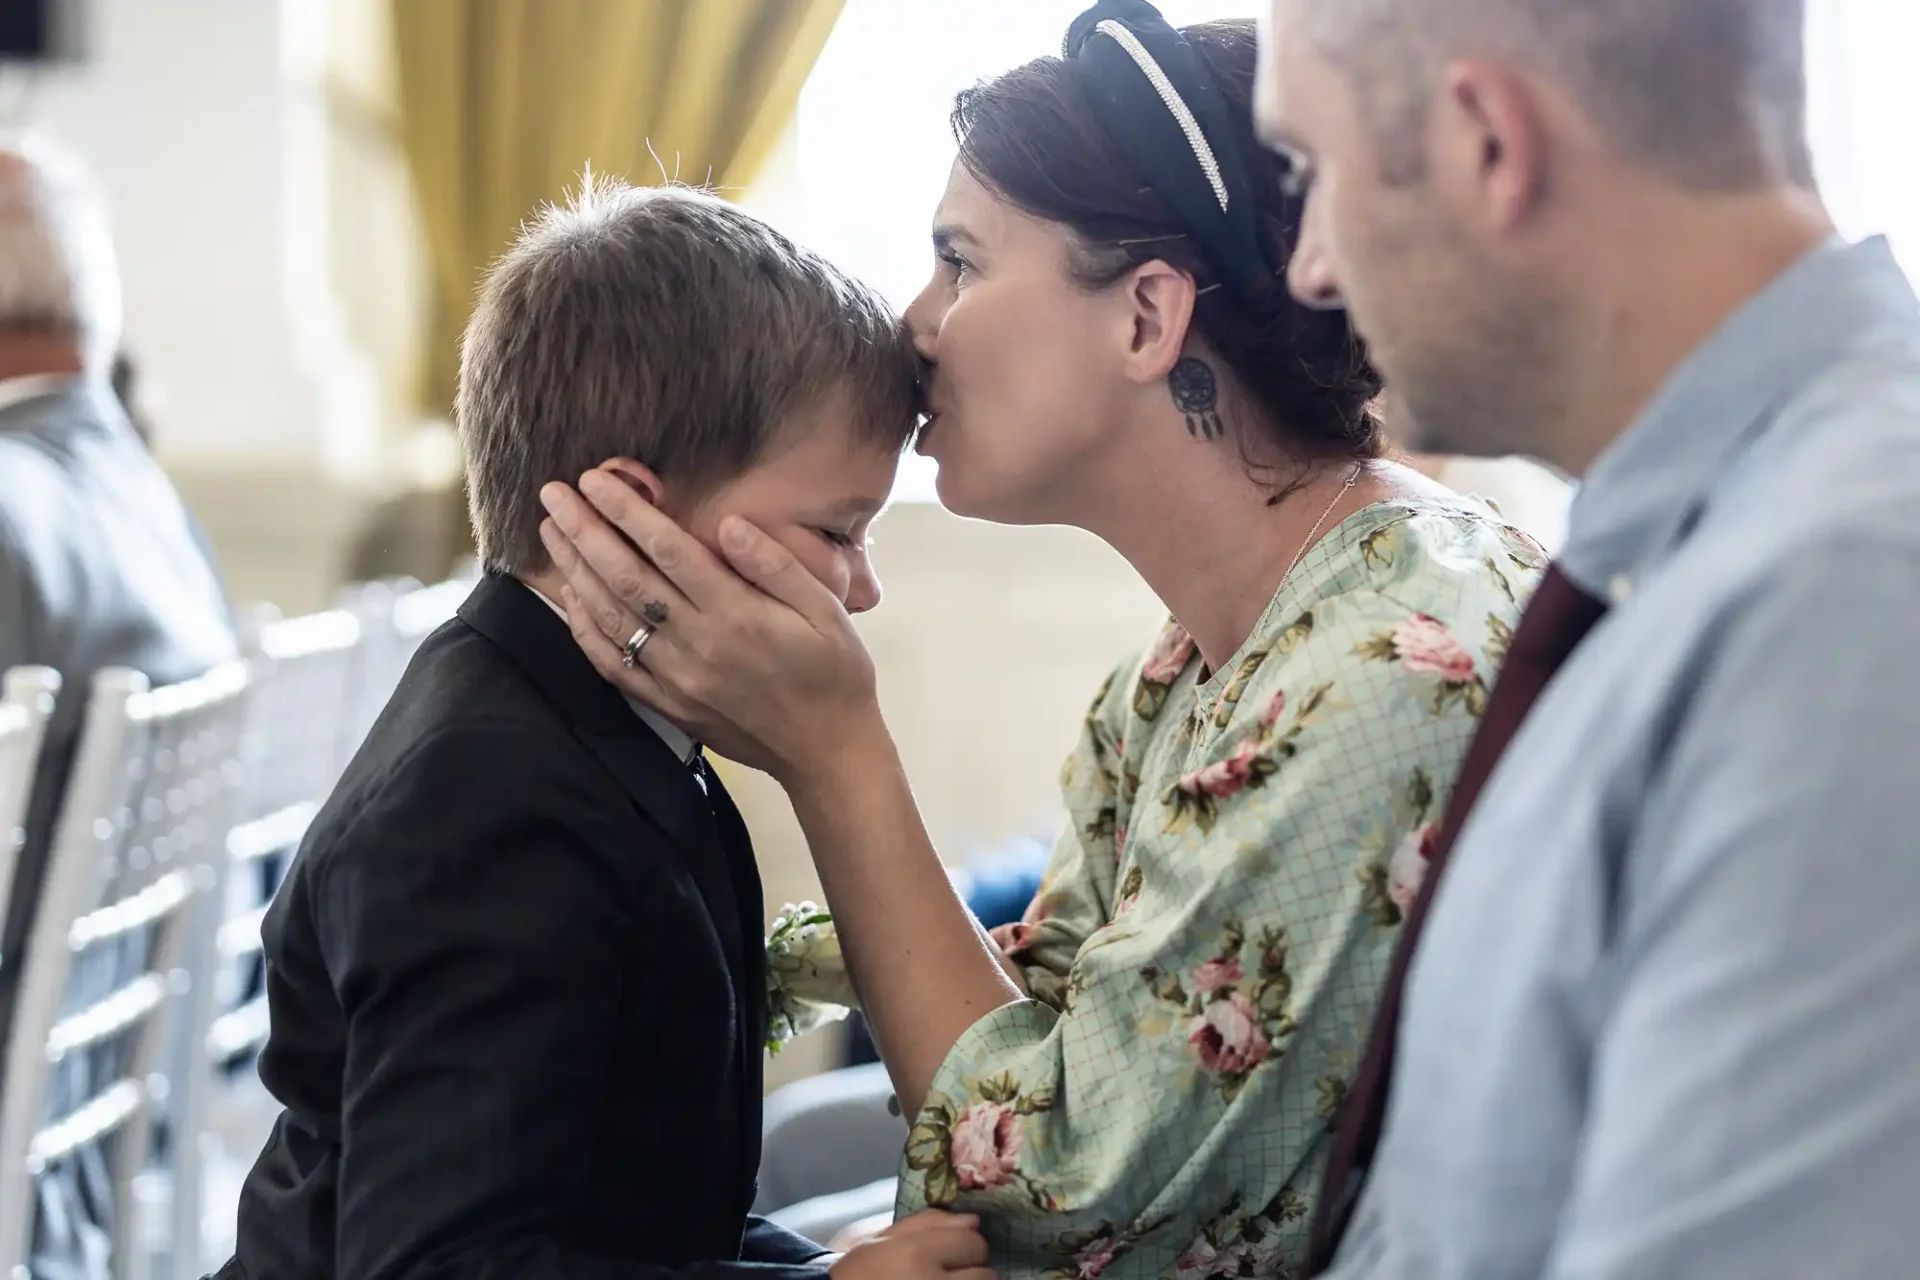 A woman in a floral dress kissing a young boy on the forehead at a formal event, with a man seated beside them.